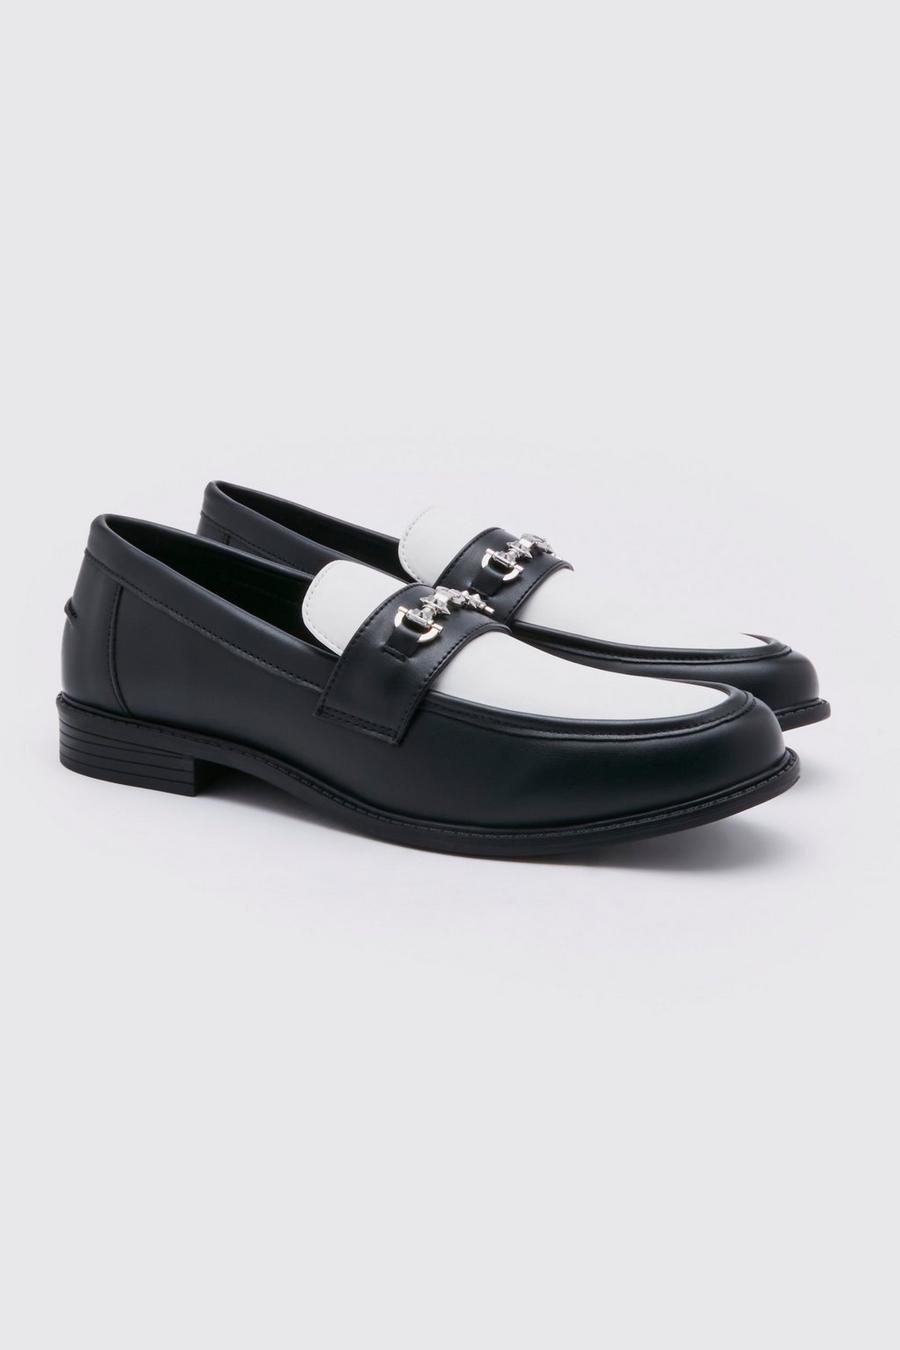 Black Monochrome Penny Loafers Met Ketting Detail